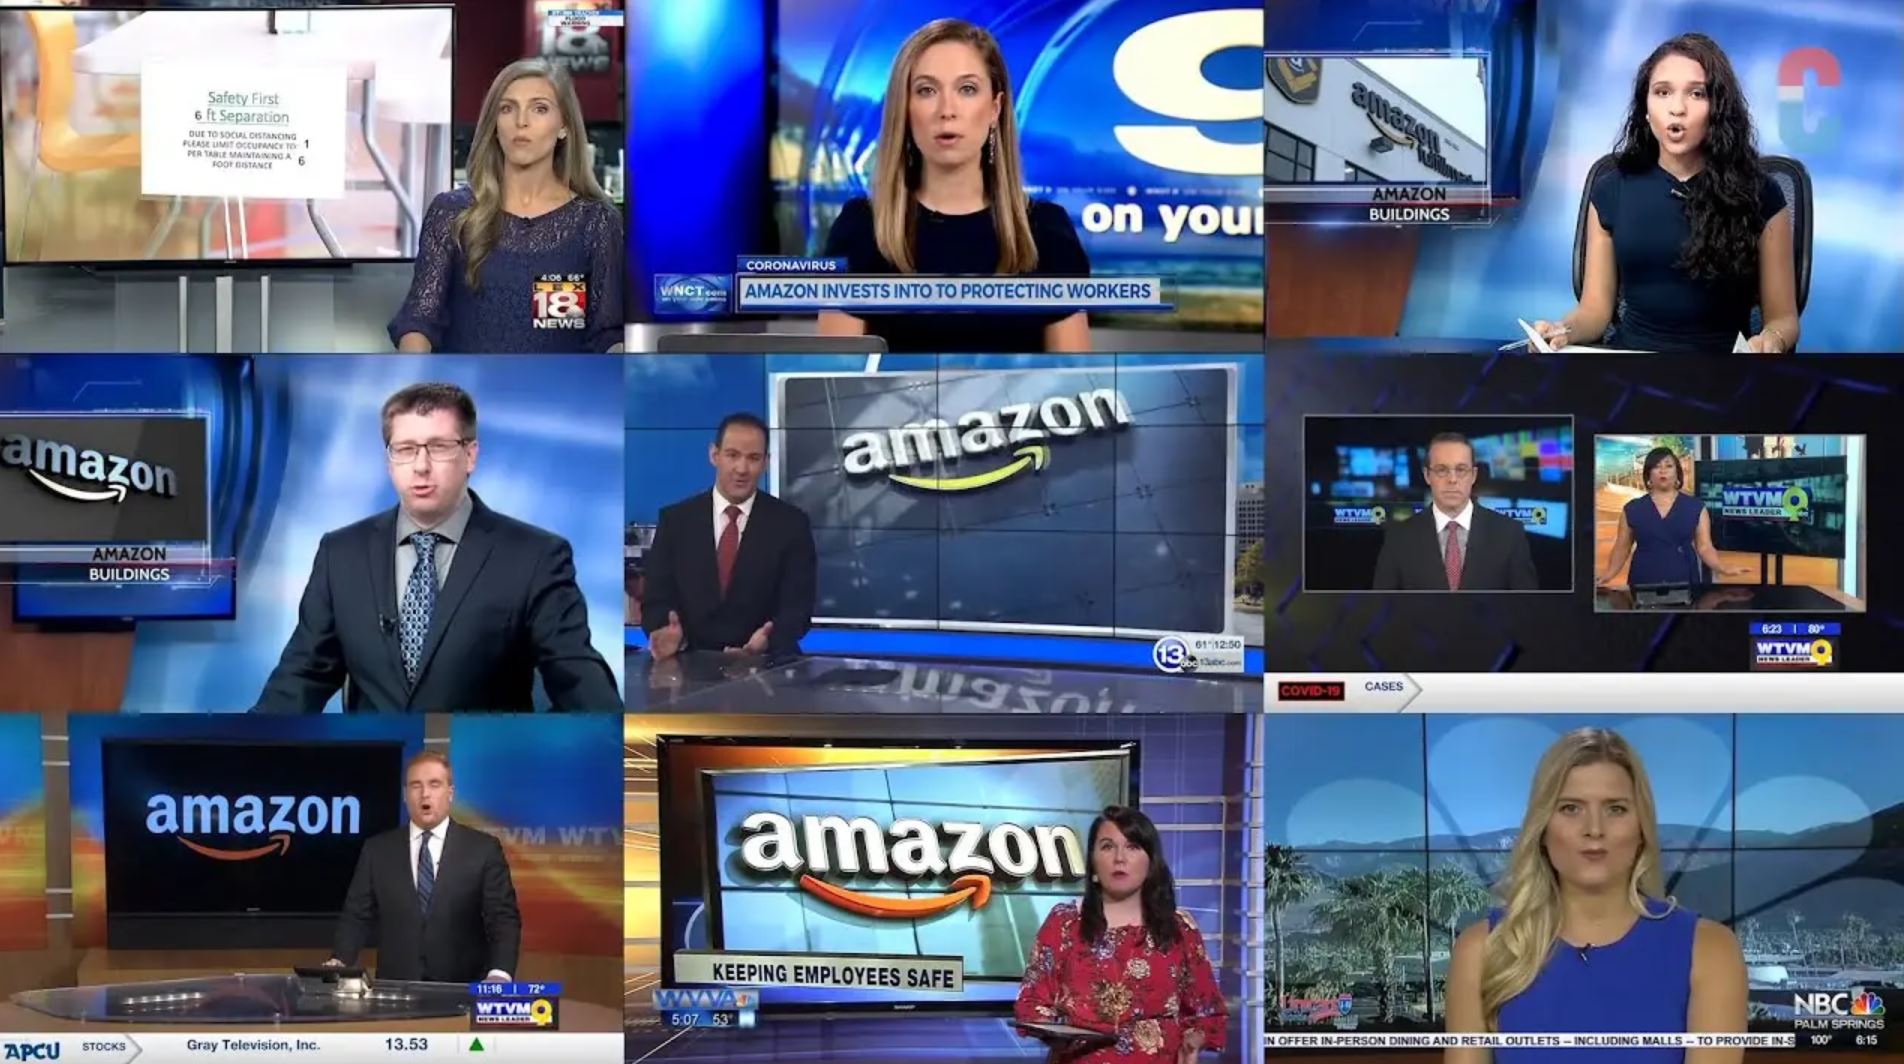 At Least 11 Local News Stations Caught Airing The Exact Same Amazon